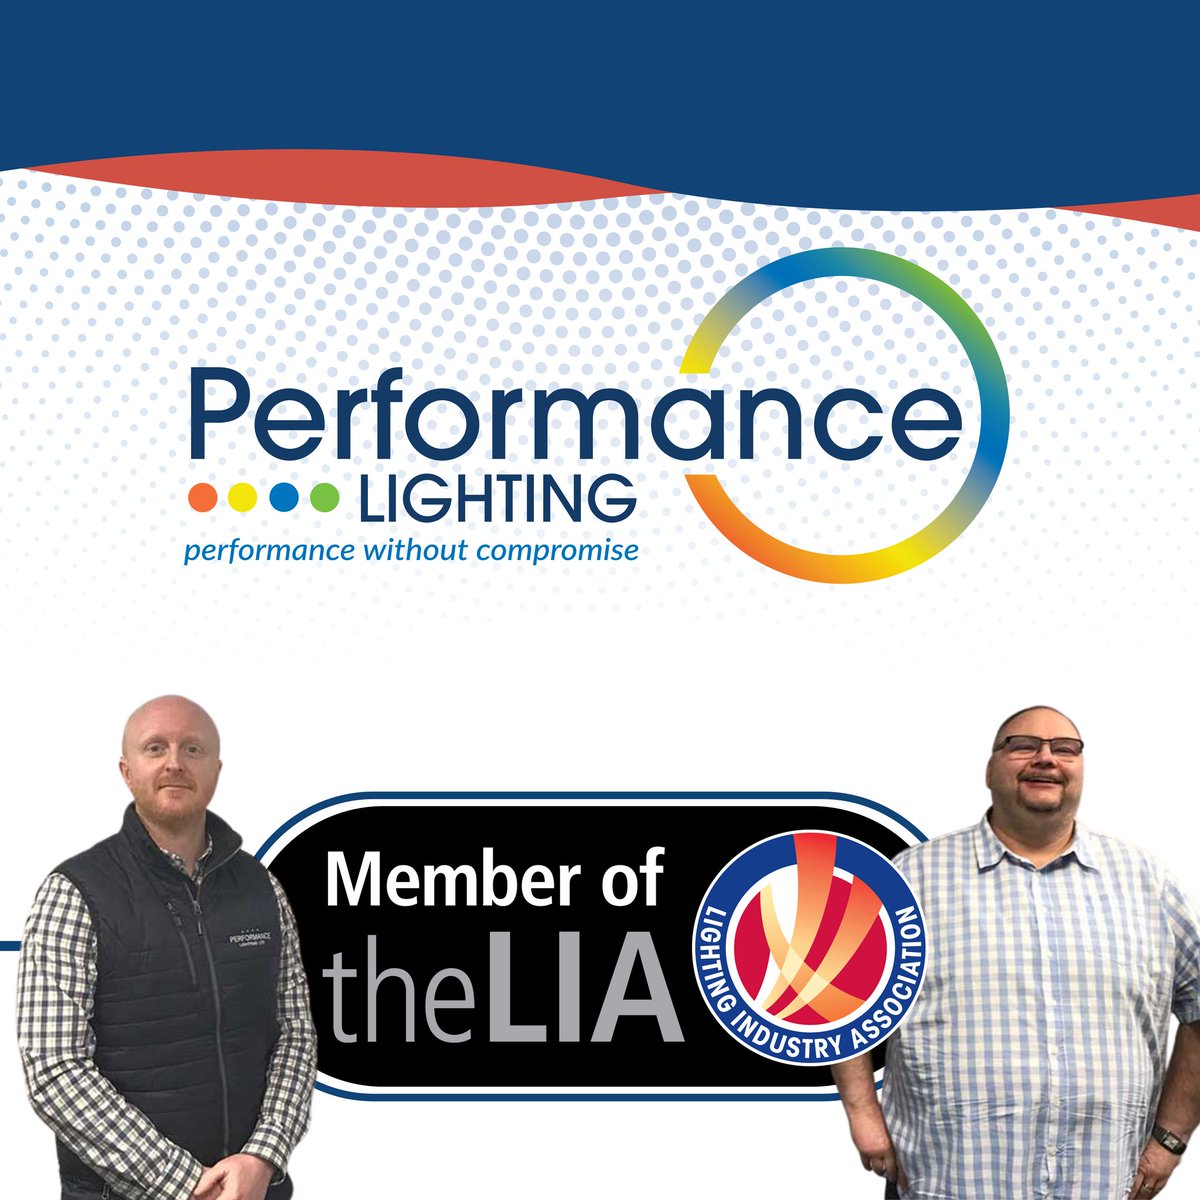 Are you heading to the LIA AGM and Lunch tomorrow? Keep an eye out for Matt and John! 

It's an exclusive event for LIA members, happening this Thursday (16th May). We'll see you there! 

#LIA #LightingIndustry #AGM #Lighting #LEDLighting